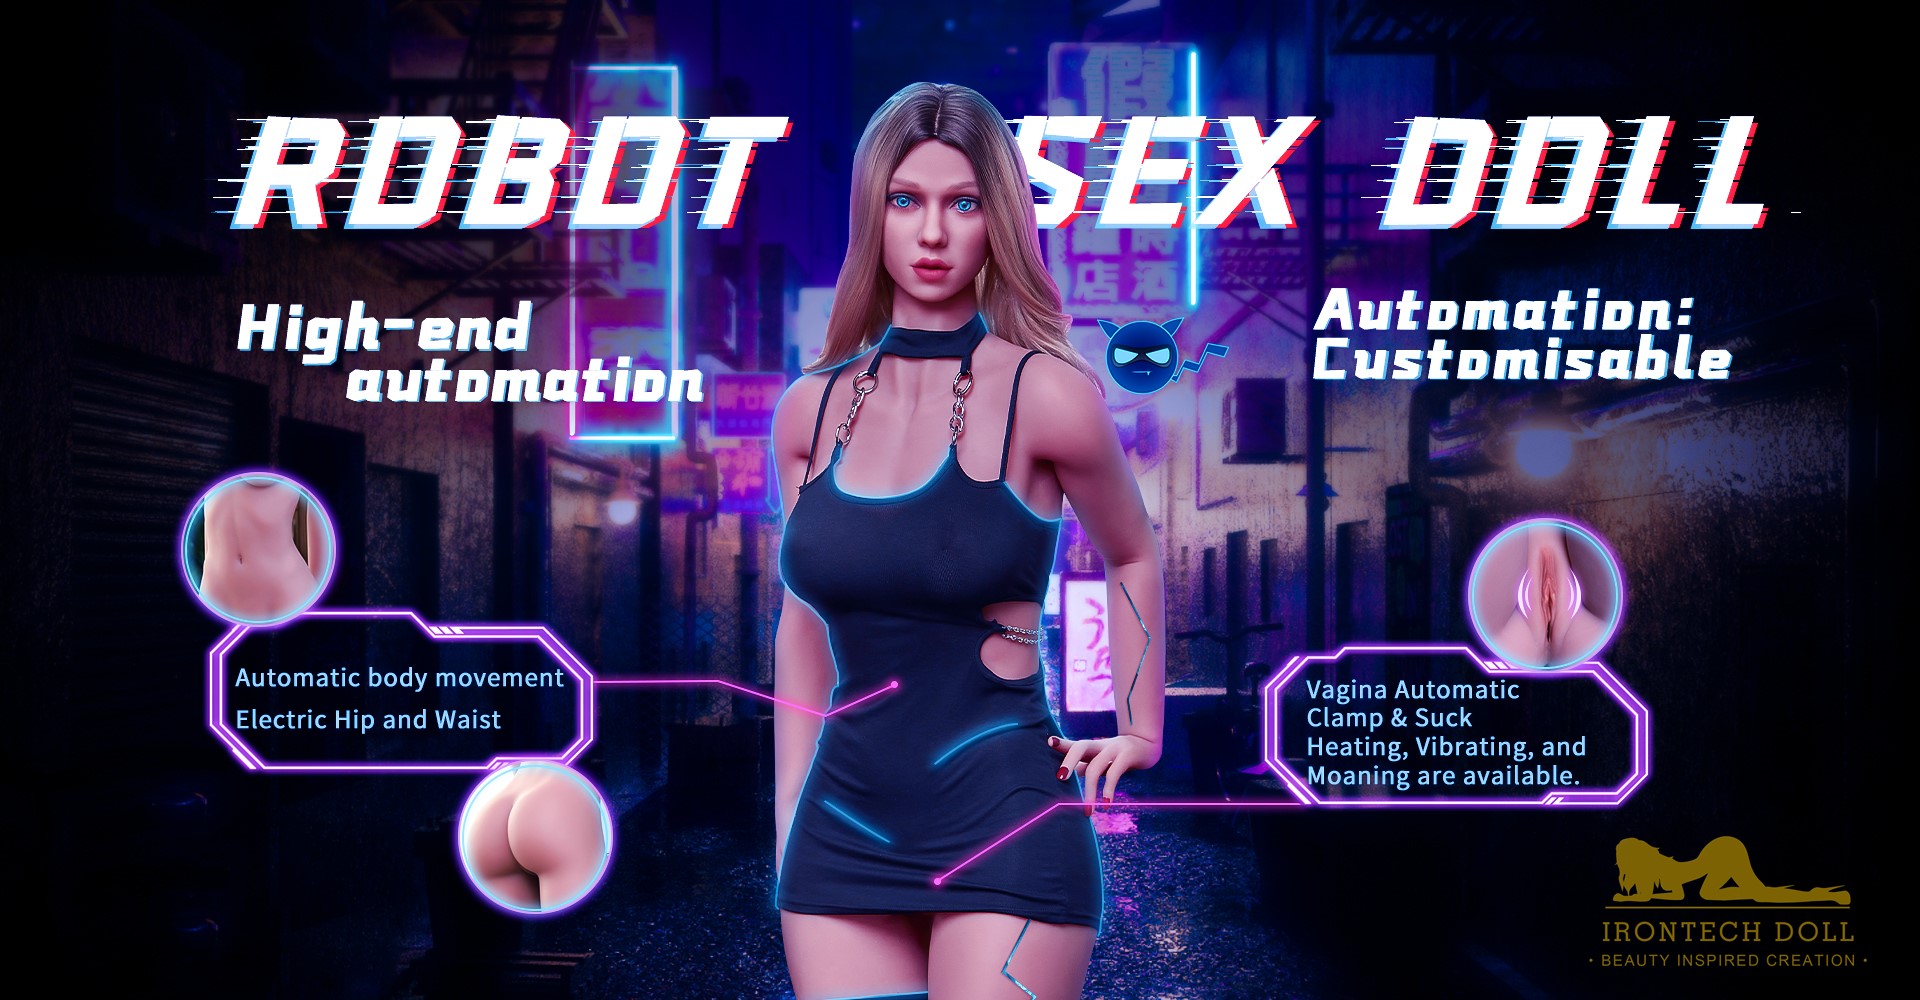 robot Sex doll from Irontech doll. Upgrade your TPE doll to a robot-Sex doll with these new features!